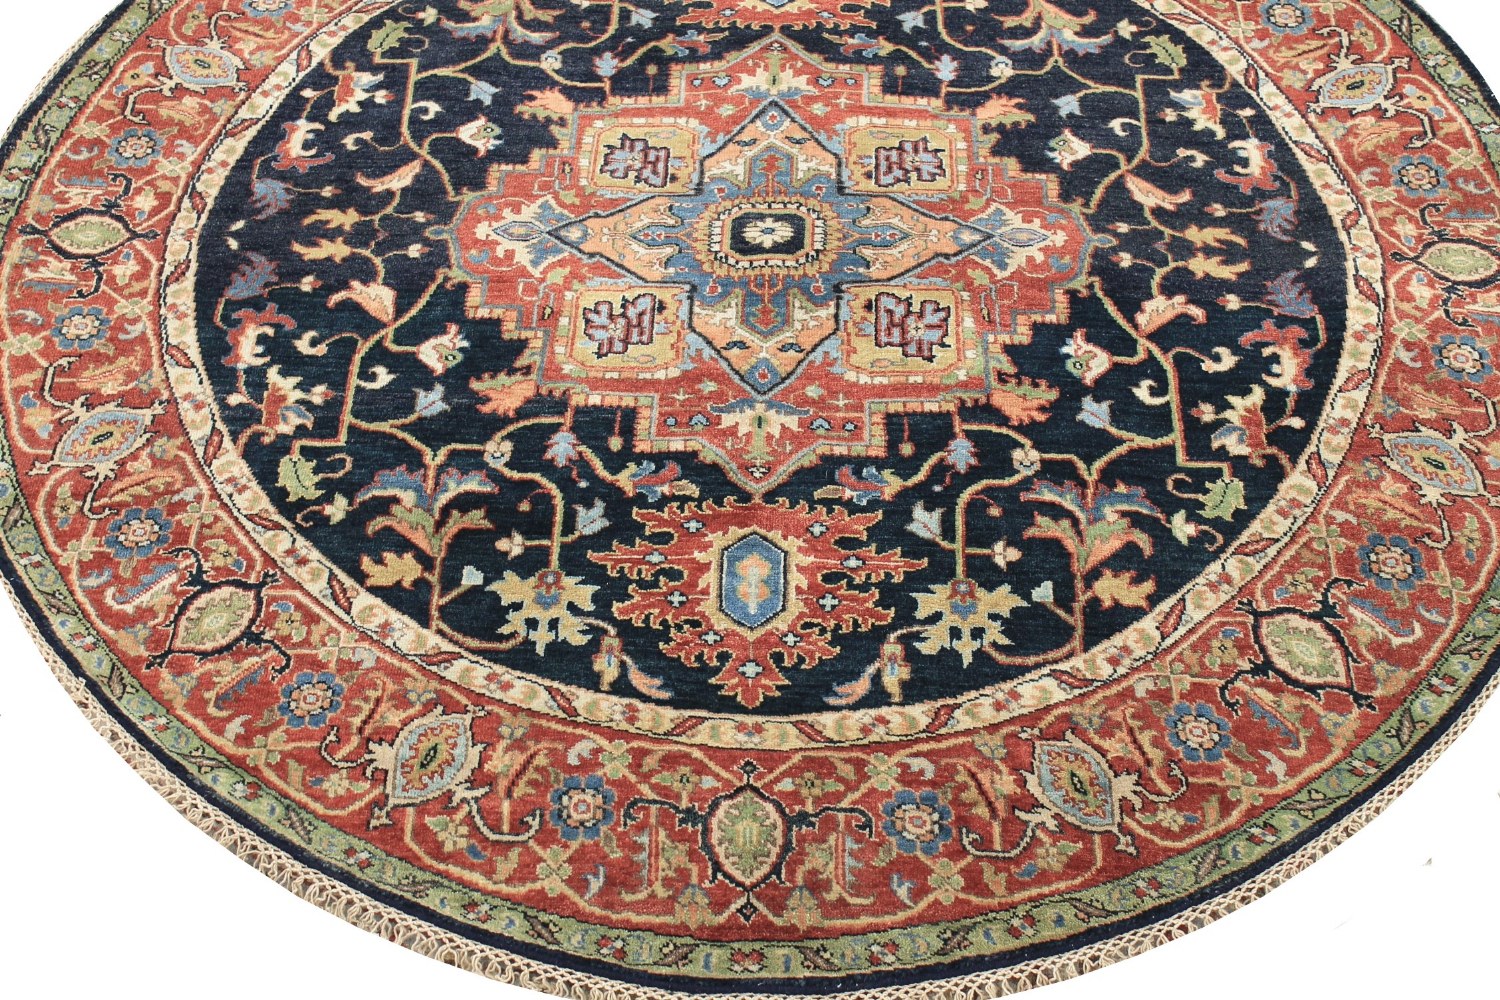 6 ft. - 7 ft. Round & Square Heriz/Serapi Hand Knotted Wool Area Rug - MR028156